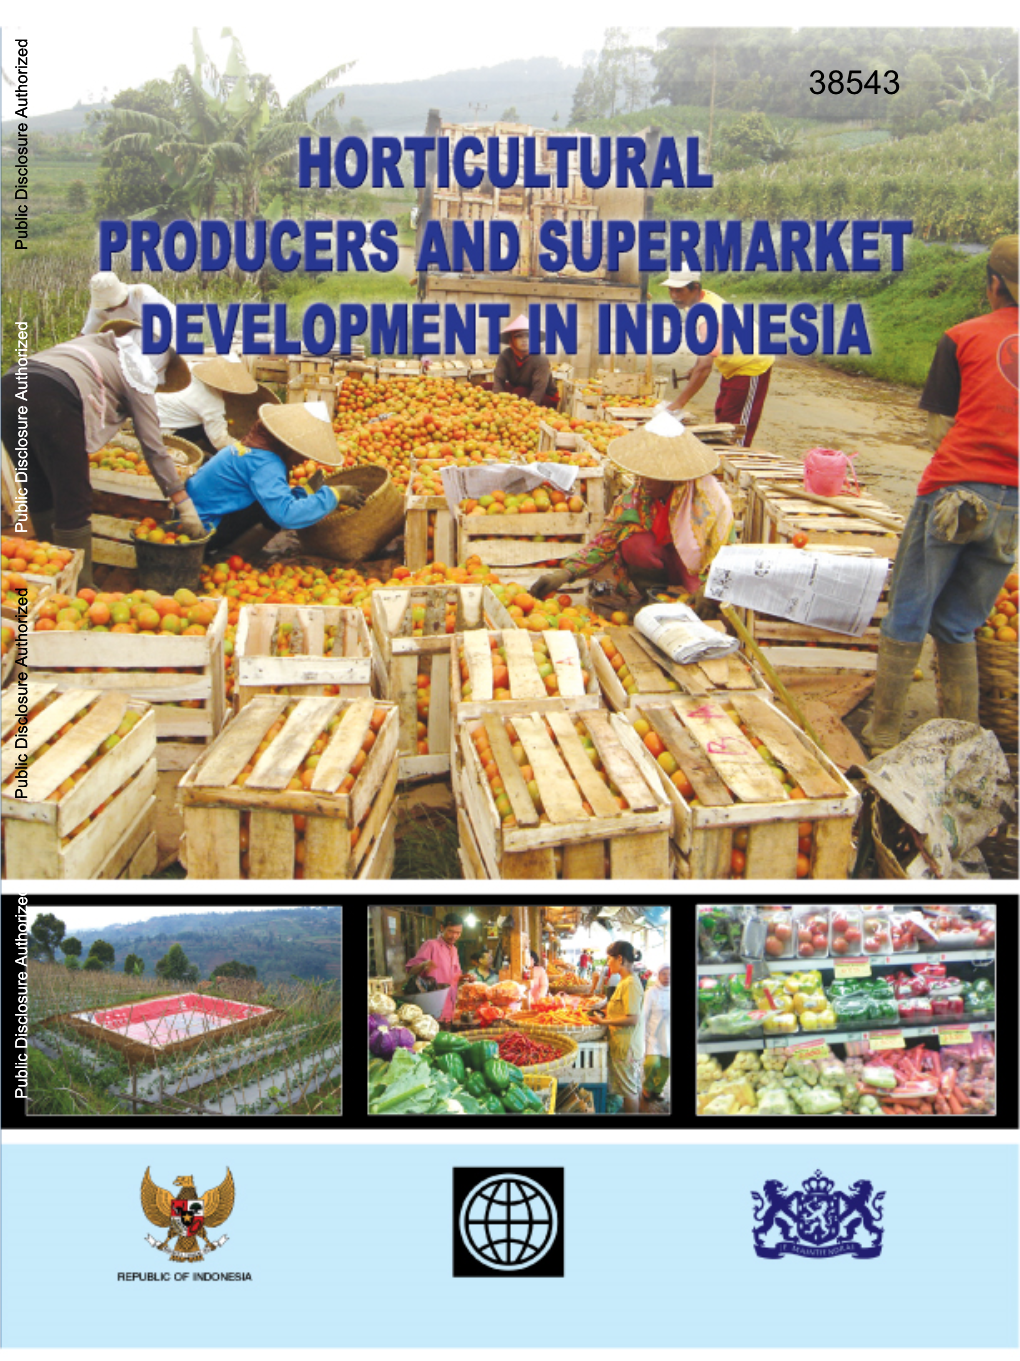 Horticultural Producers and Supermarket Development in Indonesia